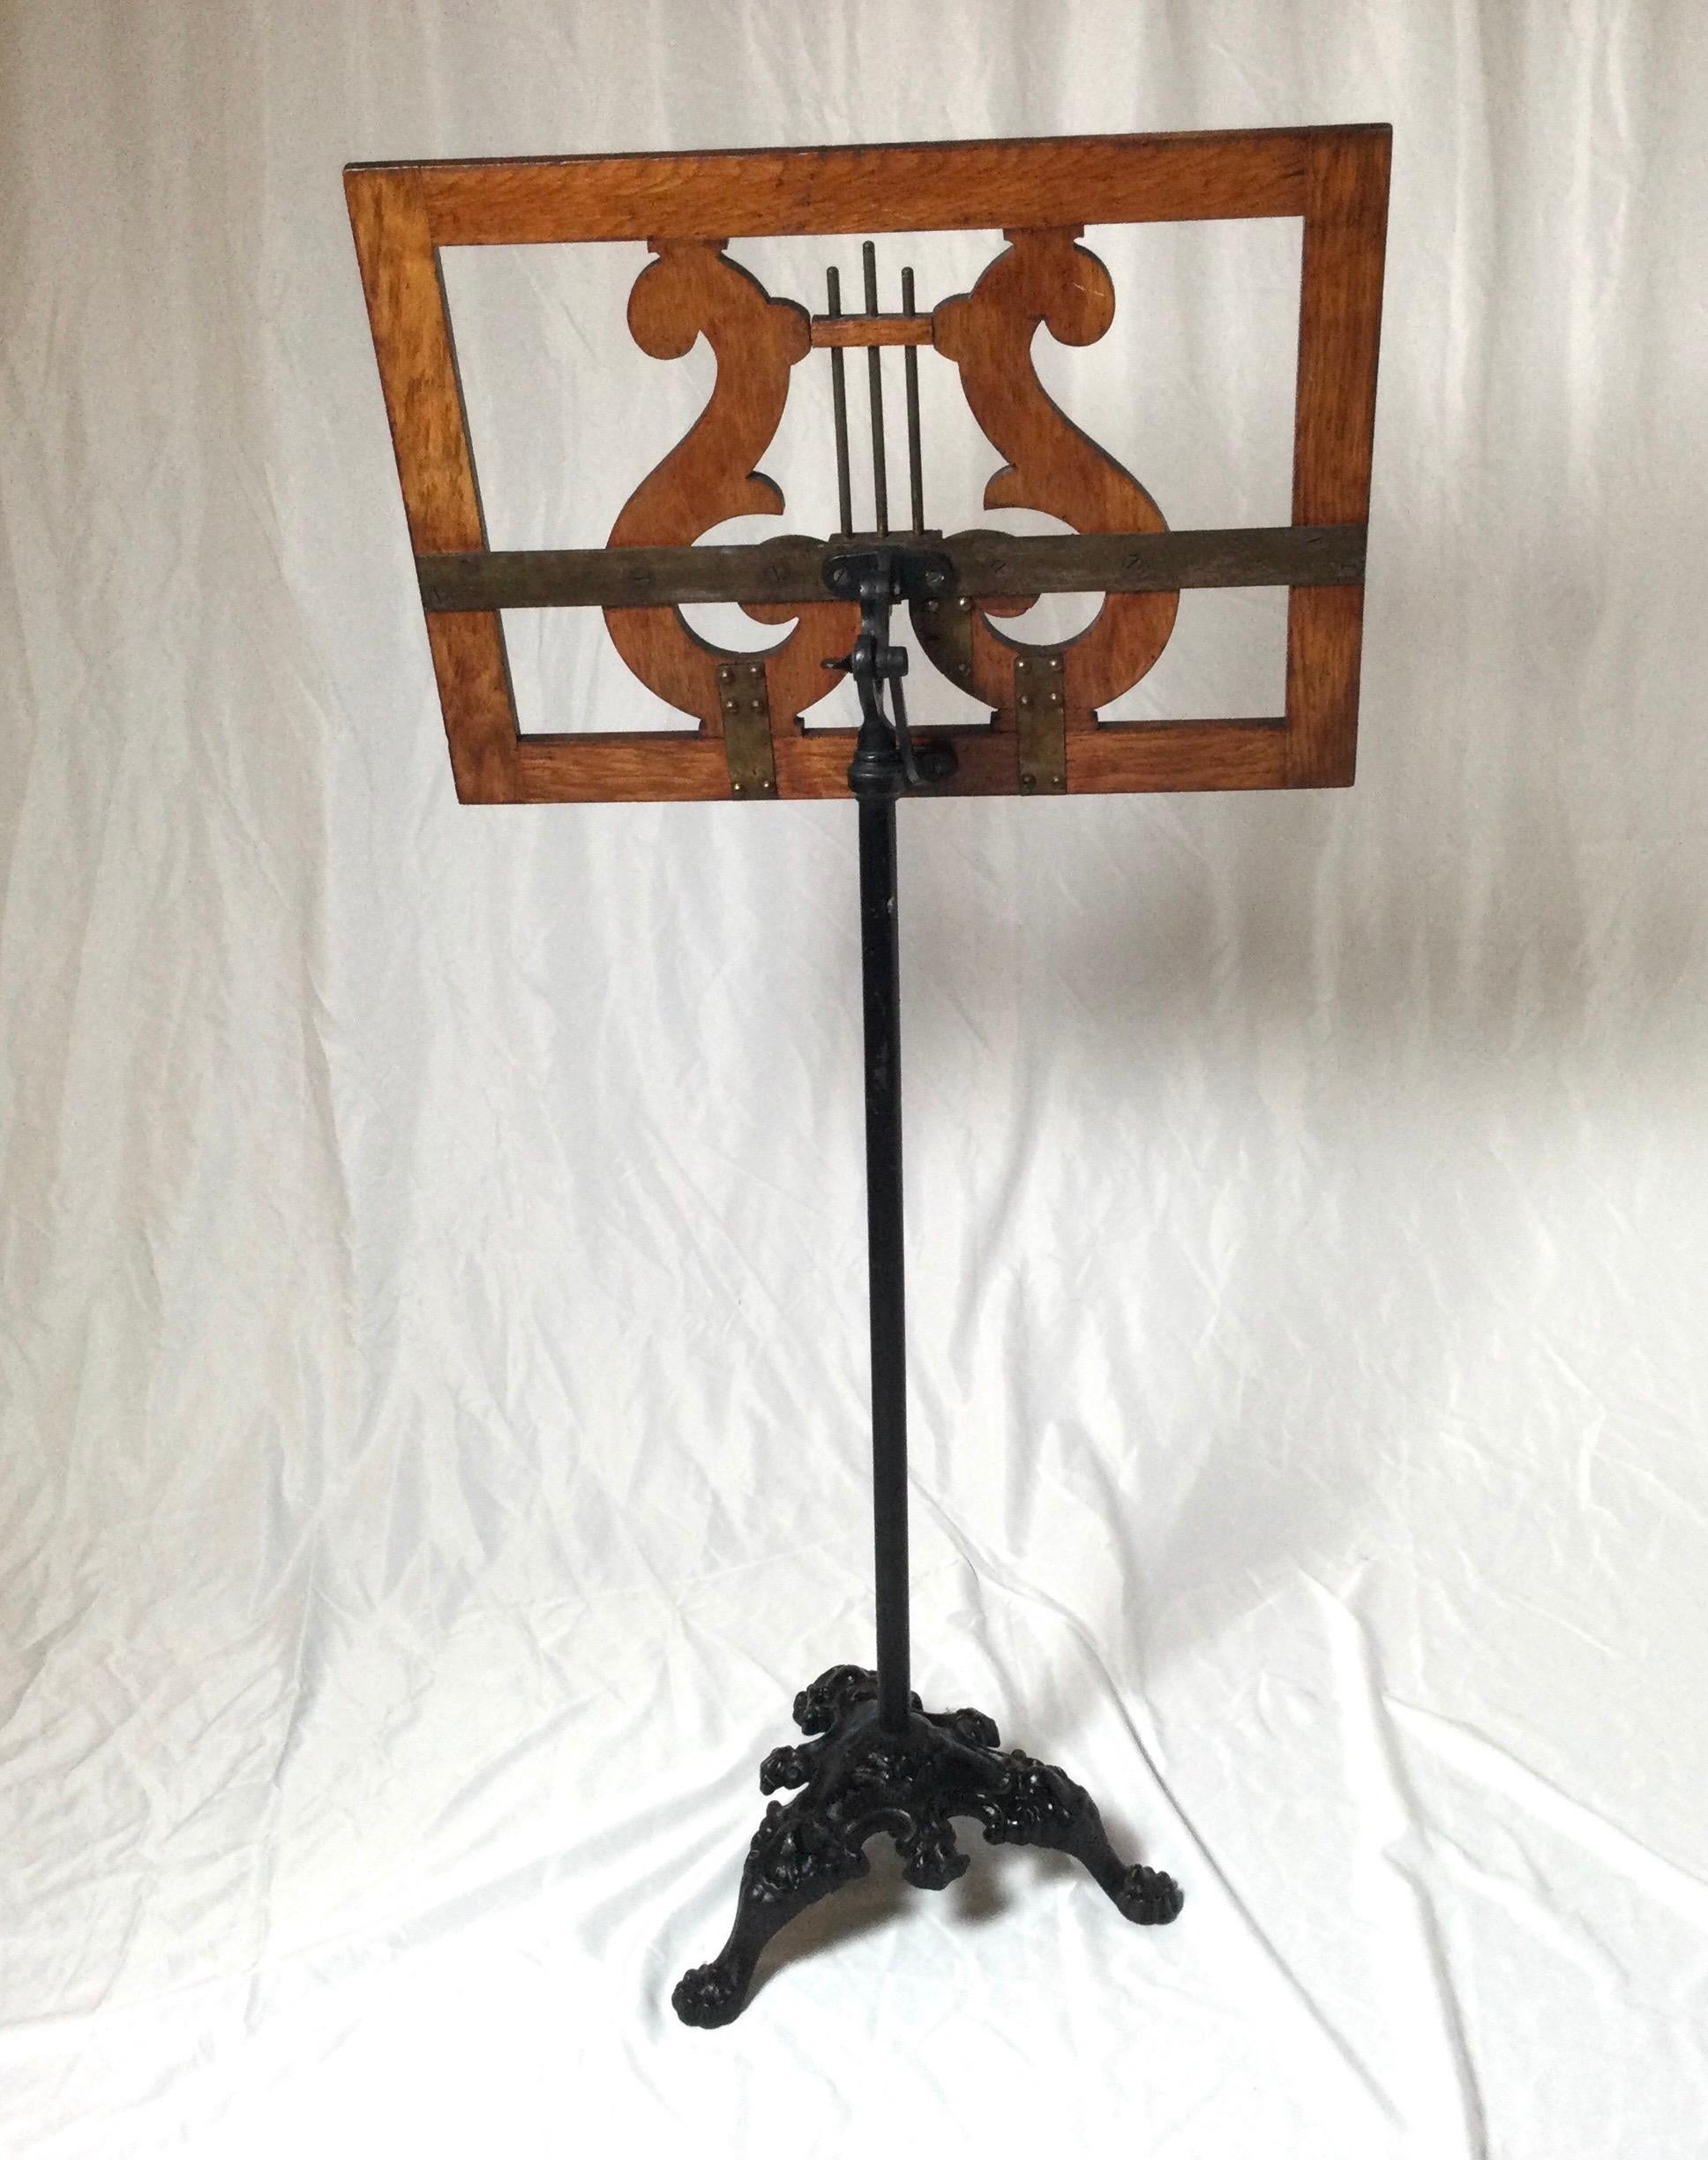 Neoclassical style adjustable oak and metal music stand. It adjusts up to about 64